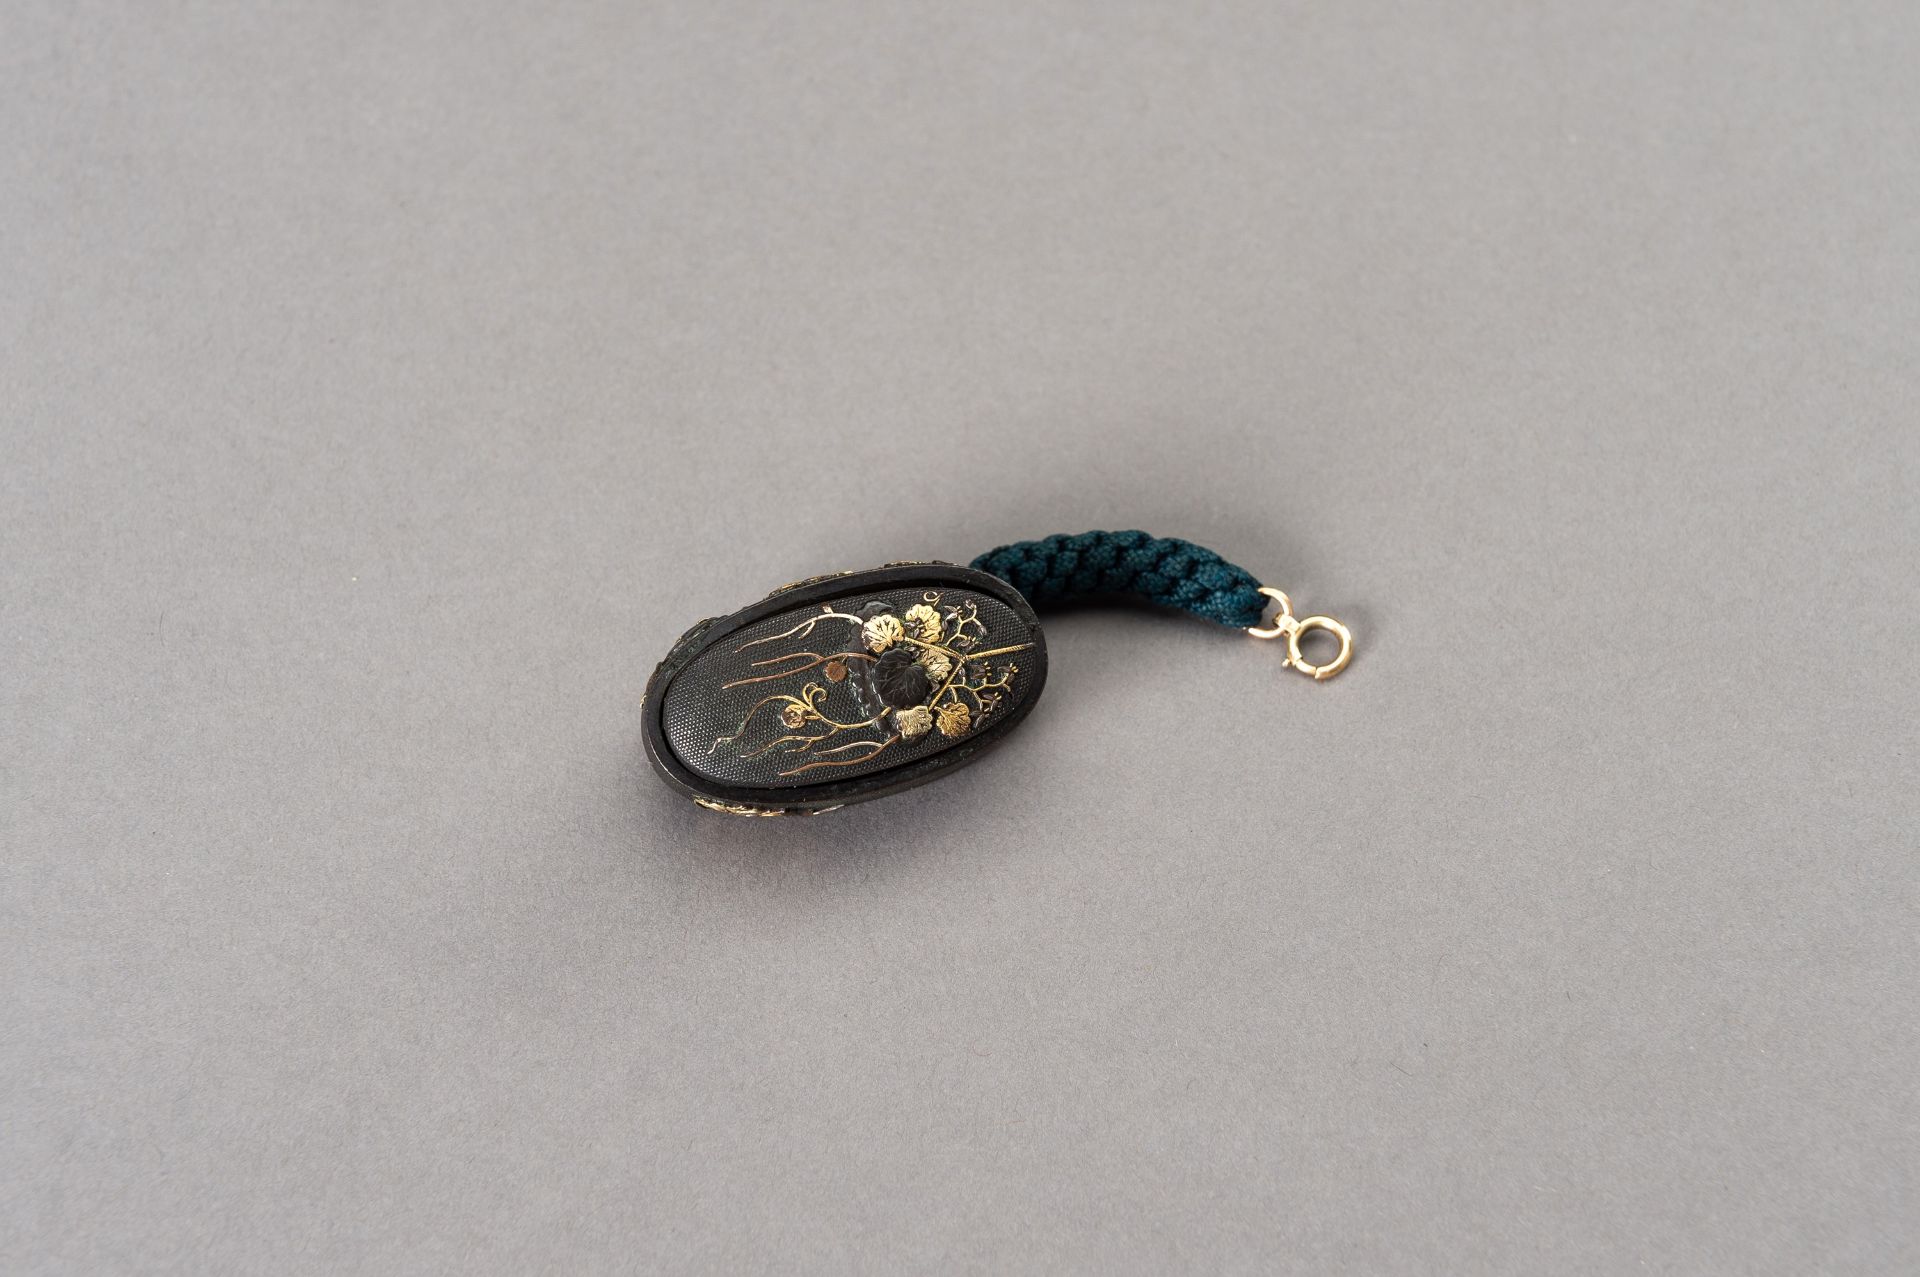 A FINE FUCHI AND KASHIRA WITH BELL FLOWERS - Image 3 of 9